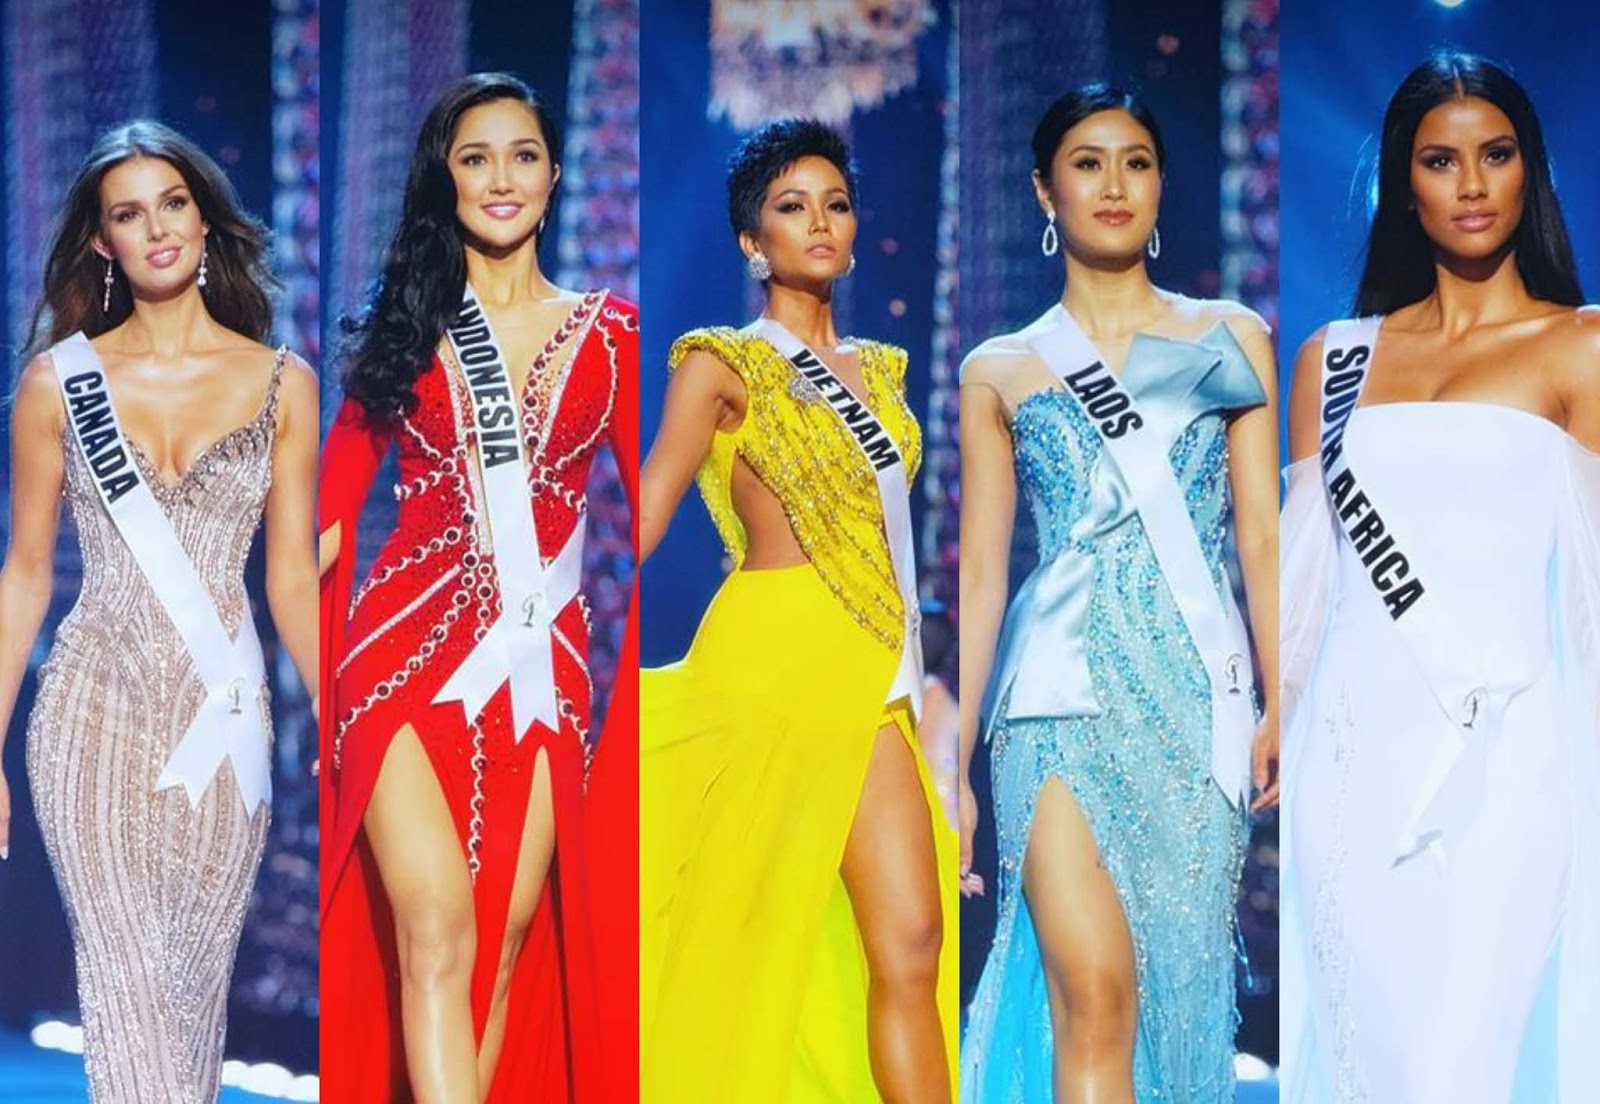 Nick Verreos: SASHES AND TIARAS.....MISS UNIVERSE 2018 Preliminary Competition: My TOP BEST GOWNS!